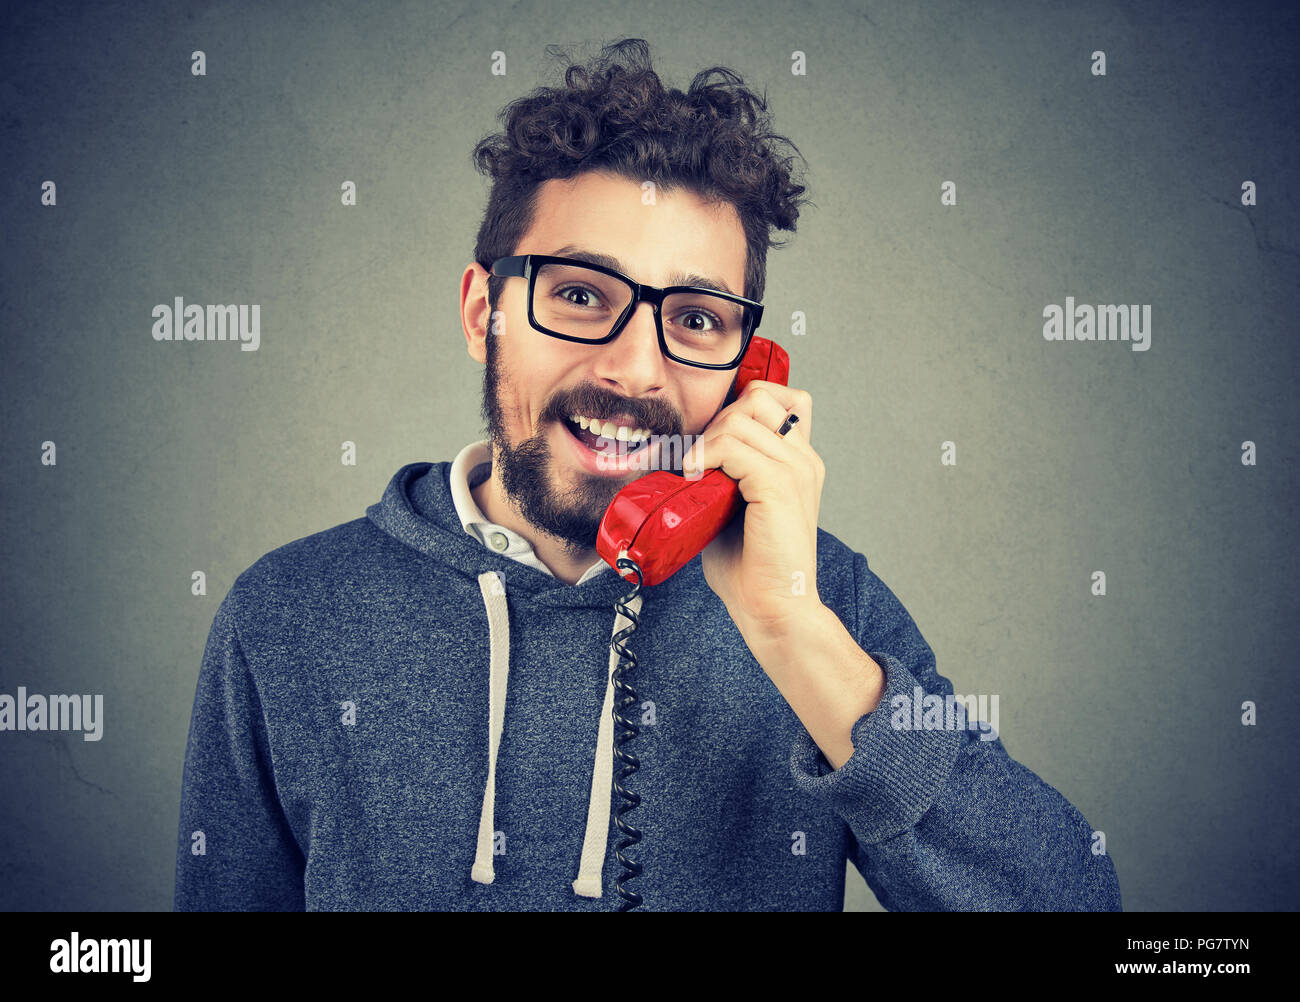 young happy man talking on a telephone Stock Photo